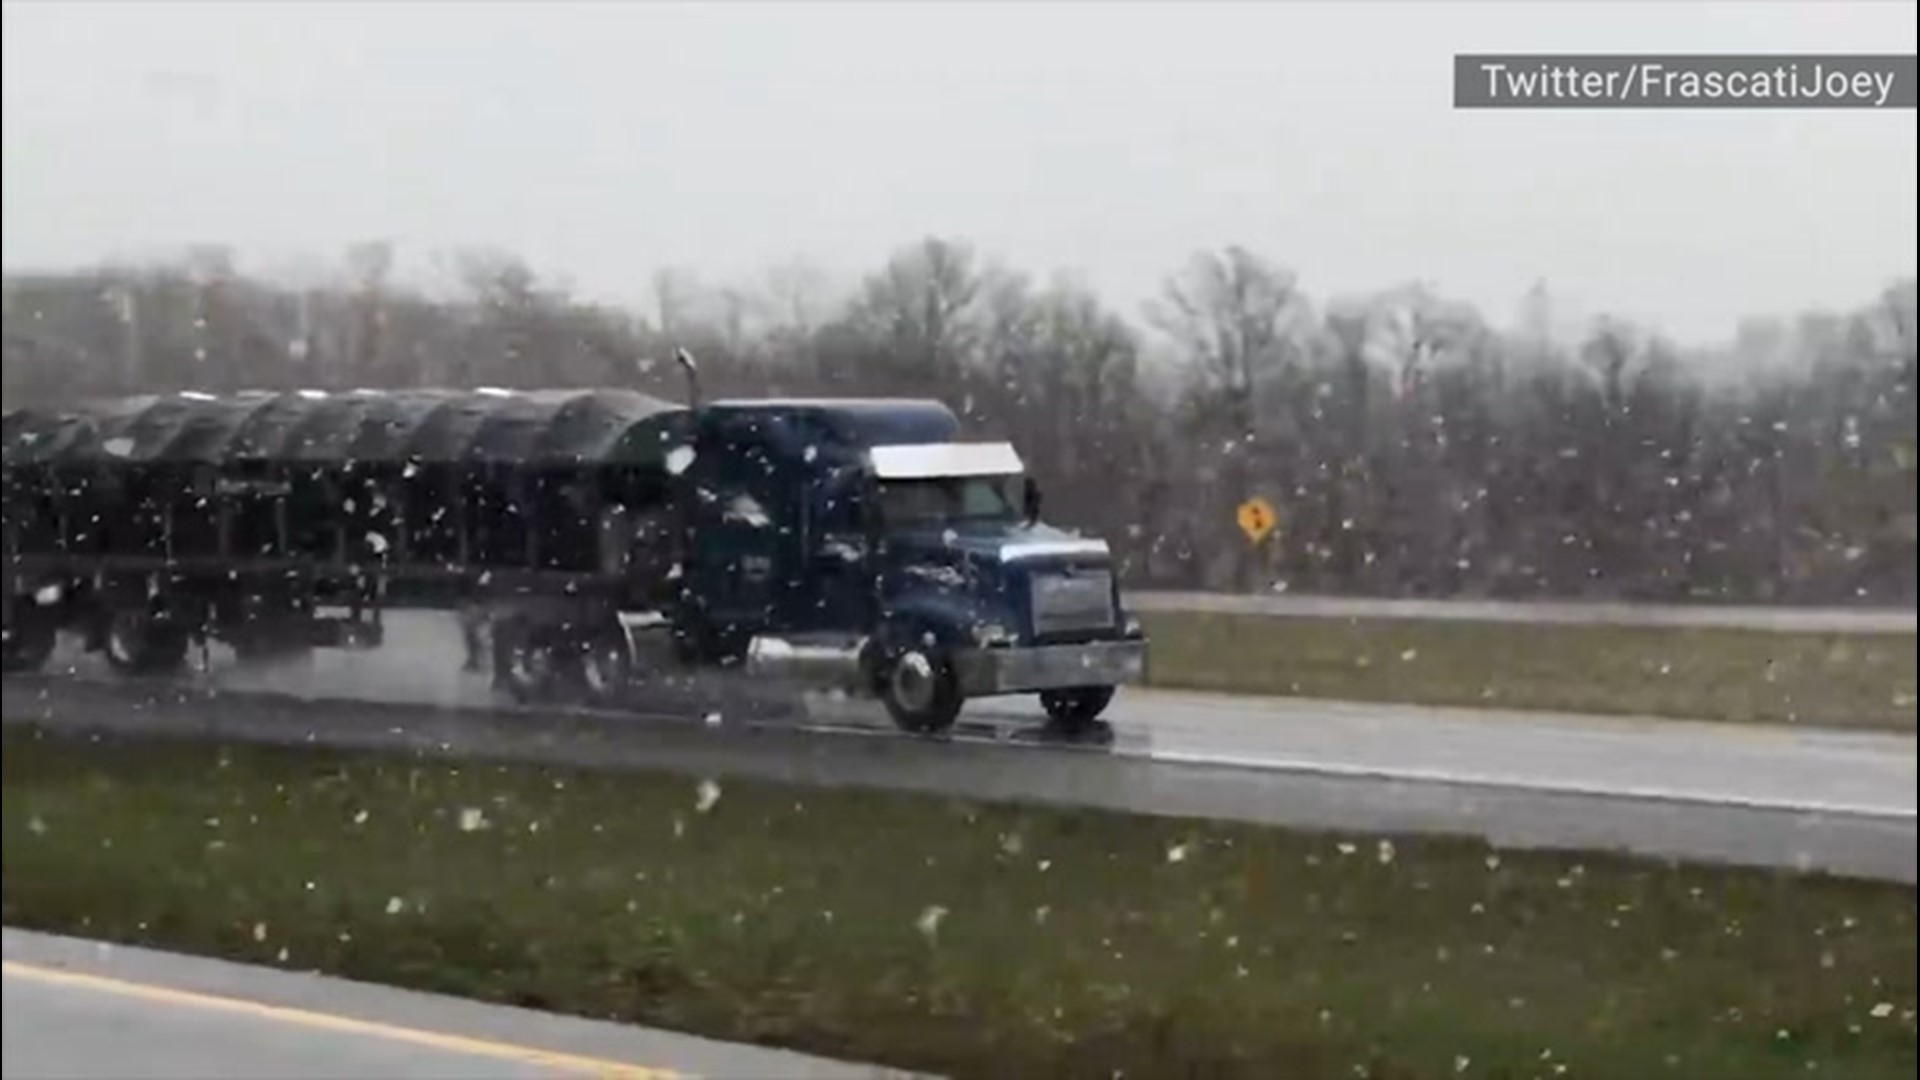 Big snowflakes fell on Interstate 490 in Churchville, New York, on April 8.